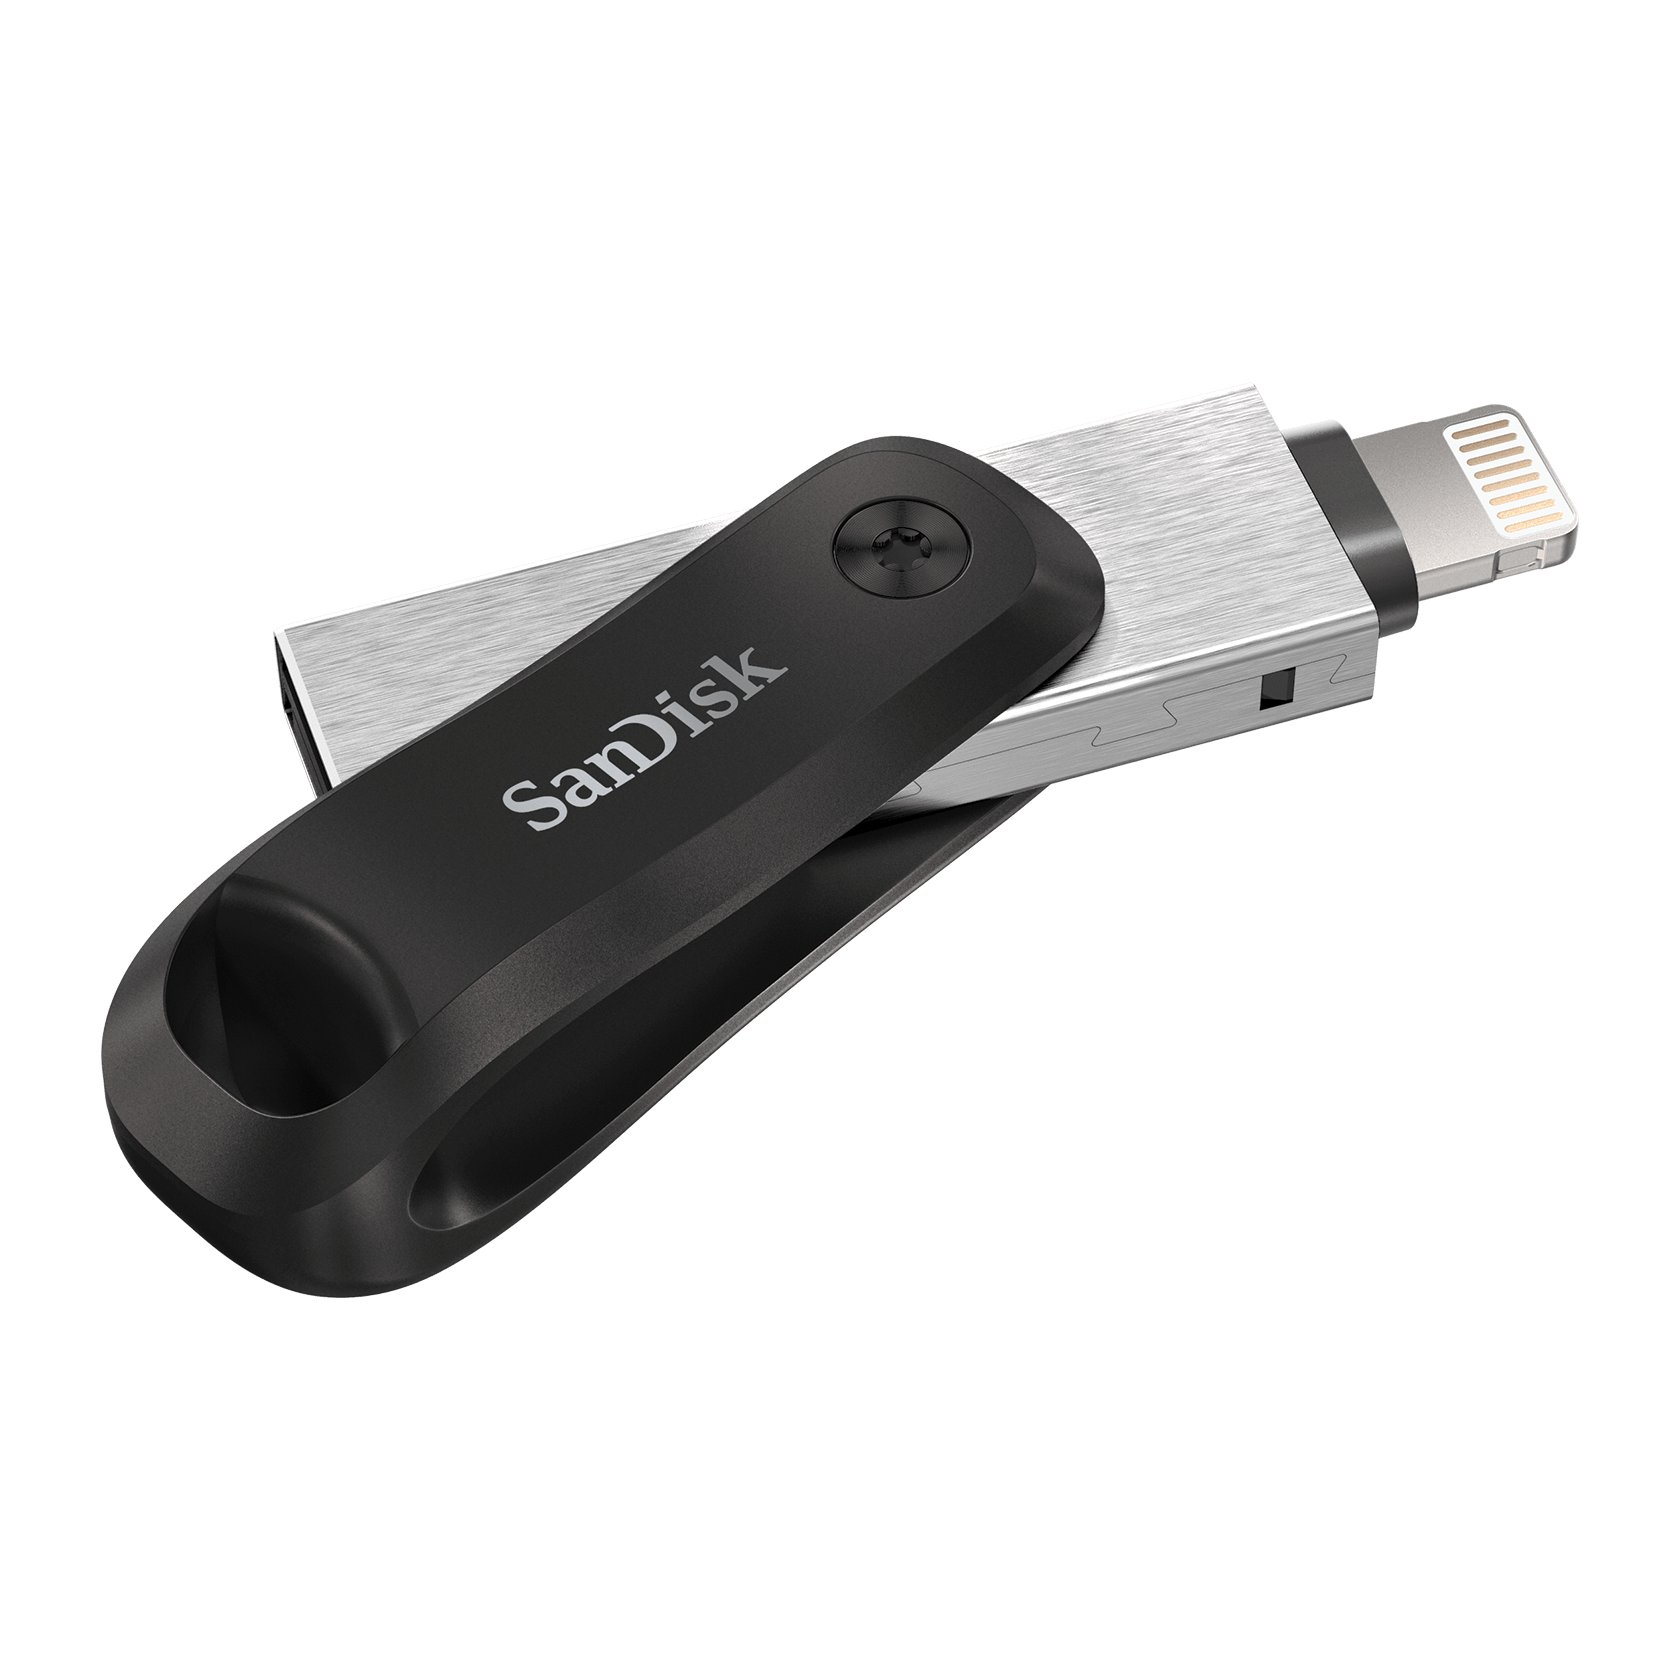 SanDisk 256GB iXpand Flash Drive Go, for iPhone and iPad - SDIX60N-256G-GN6NE - image 2 of 8